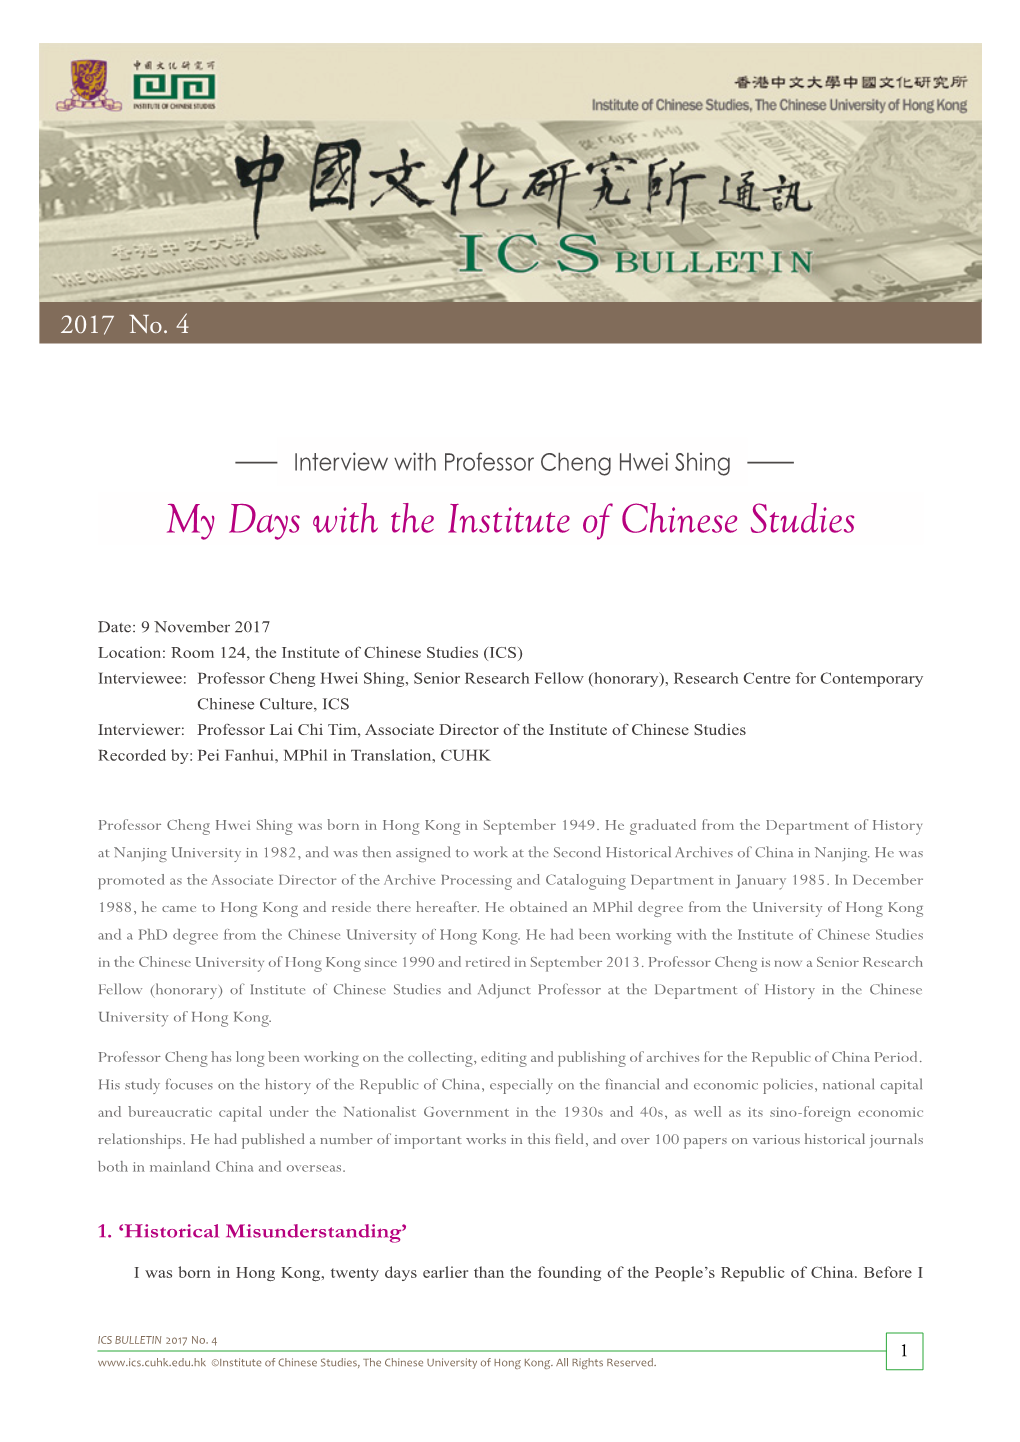 My Days with the Institute of Chinese Studies